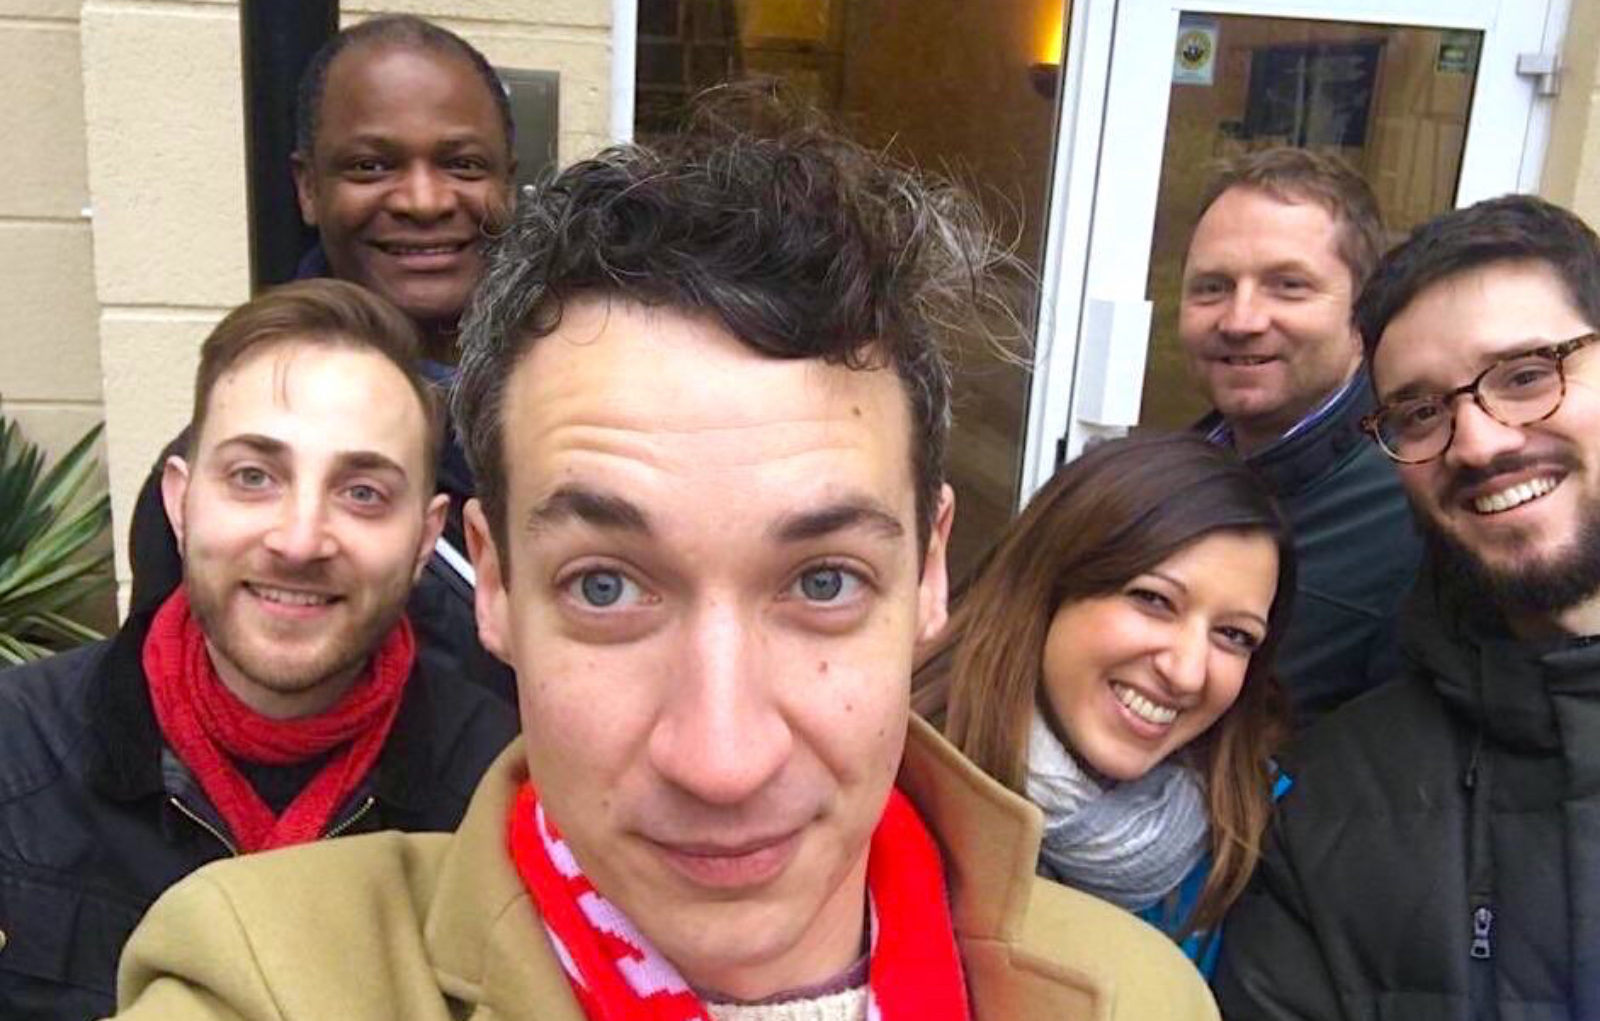 Our members and councillors out campaigning in Camberwell & Peckham